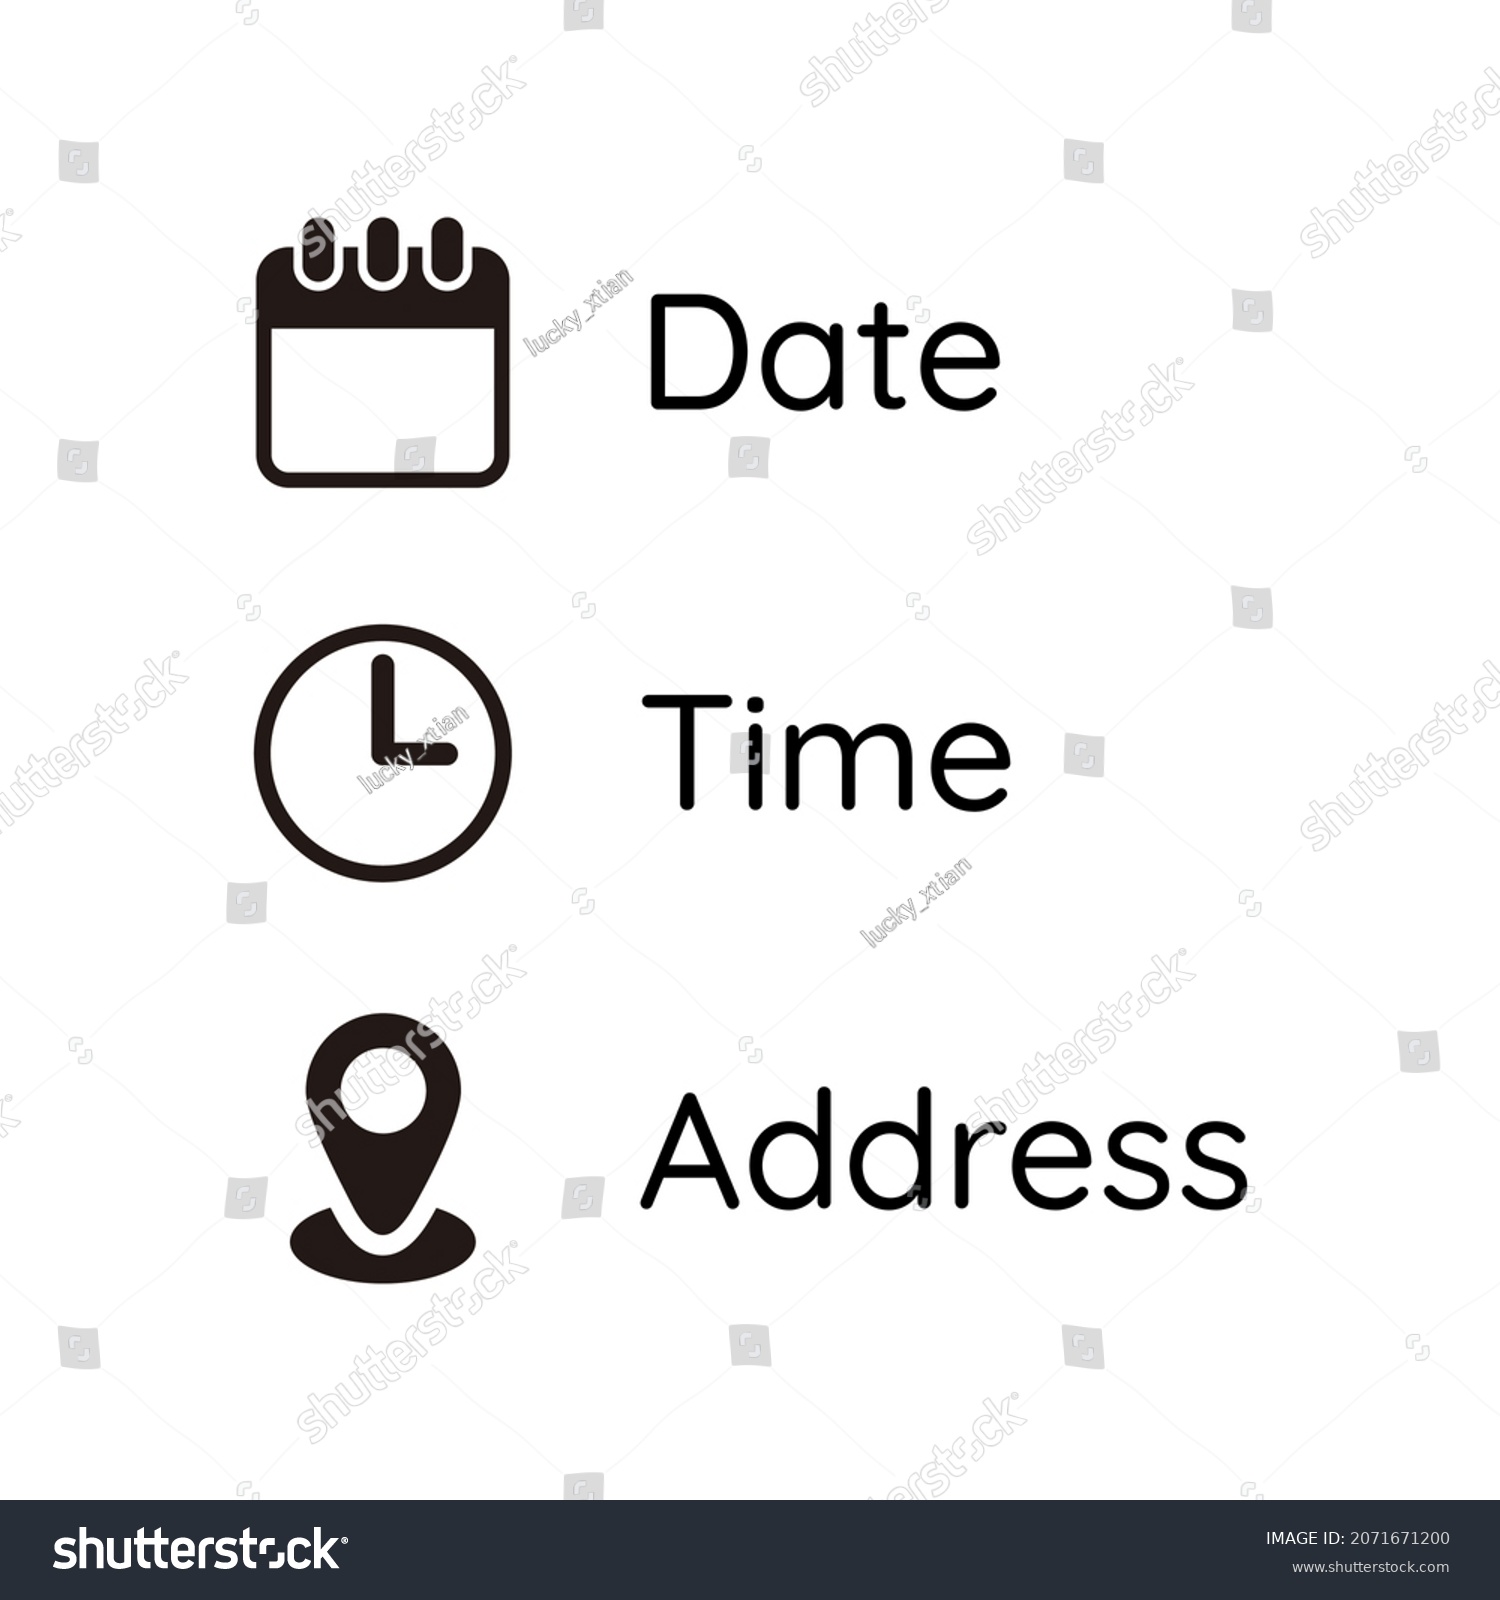 Date, Time, Address or Place Icons Symbol #2071671200